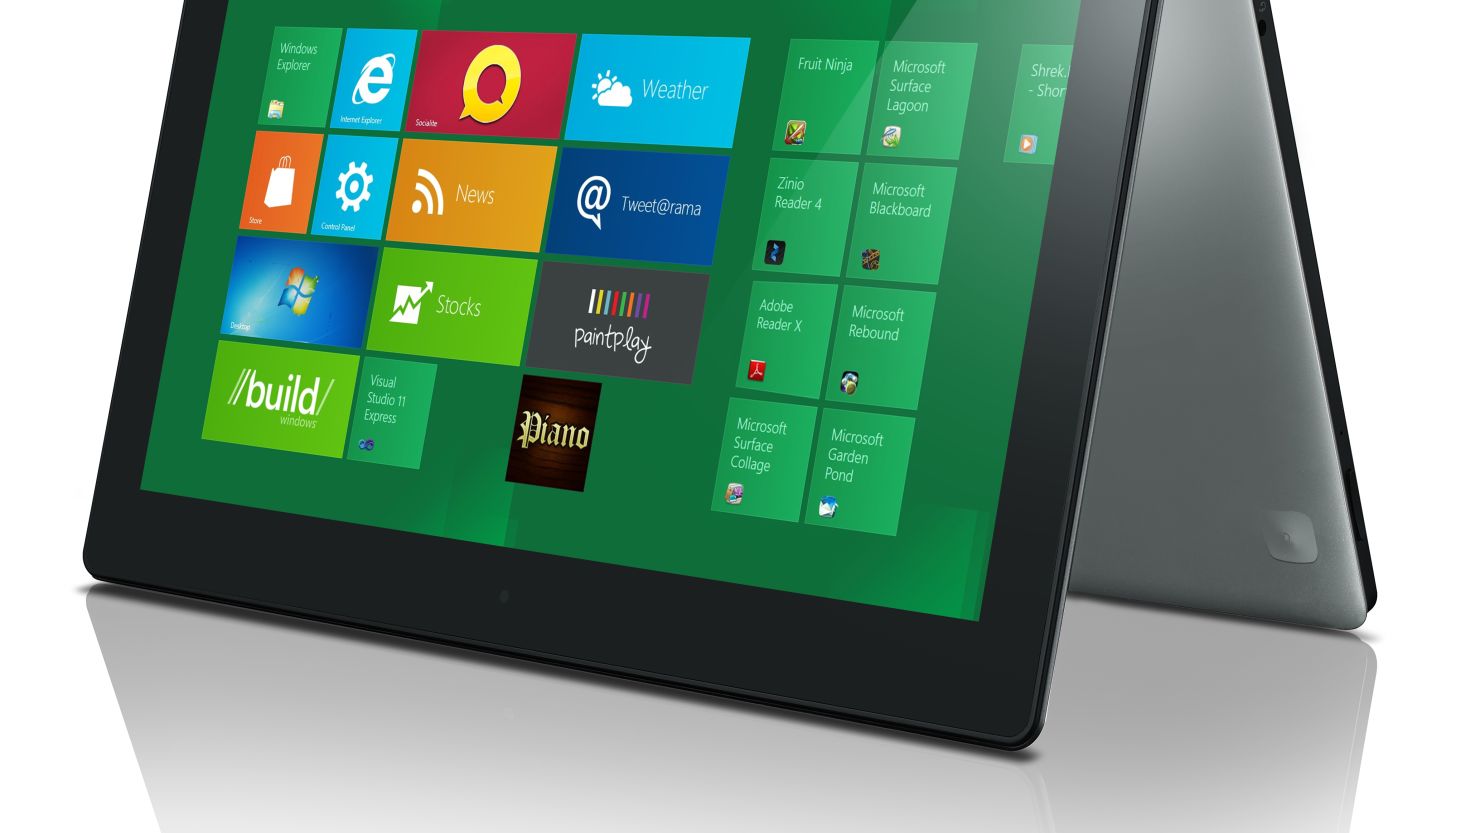 In Windows 8, app icons are live tiles, either square or rectangular in shape.